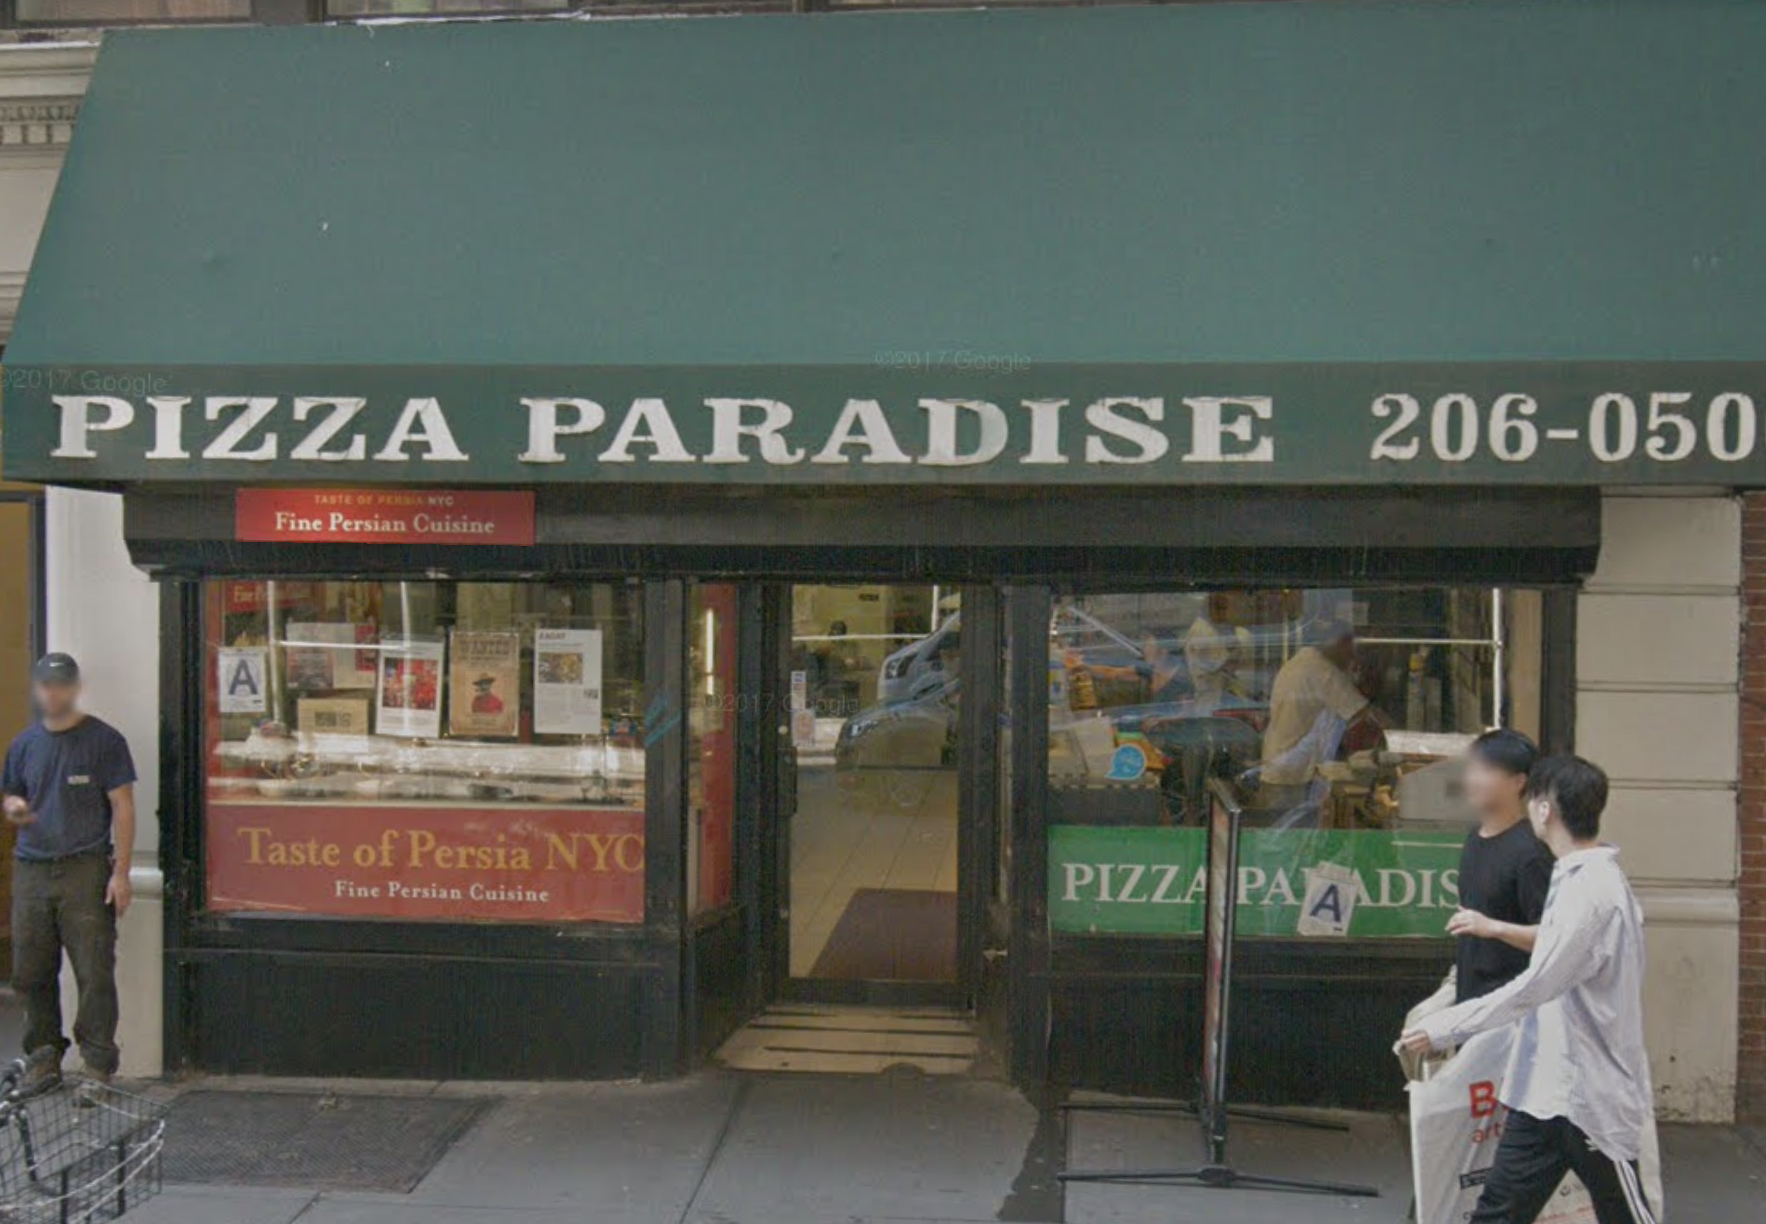 The exterior of the Persian restaurant Taste of Persia tucked into a pizzeria with a green awning. Taste of Persia has red signage out front.